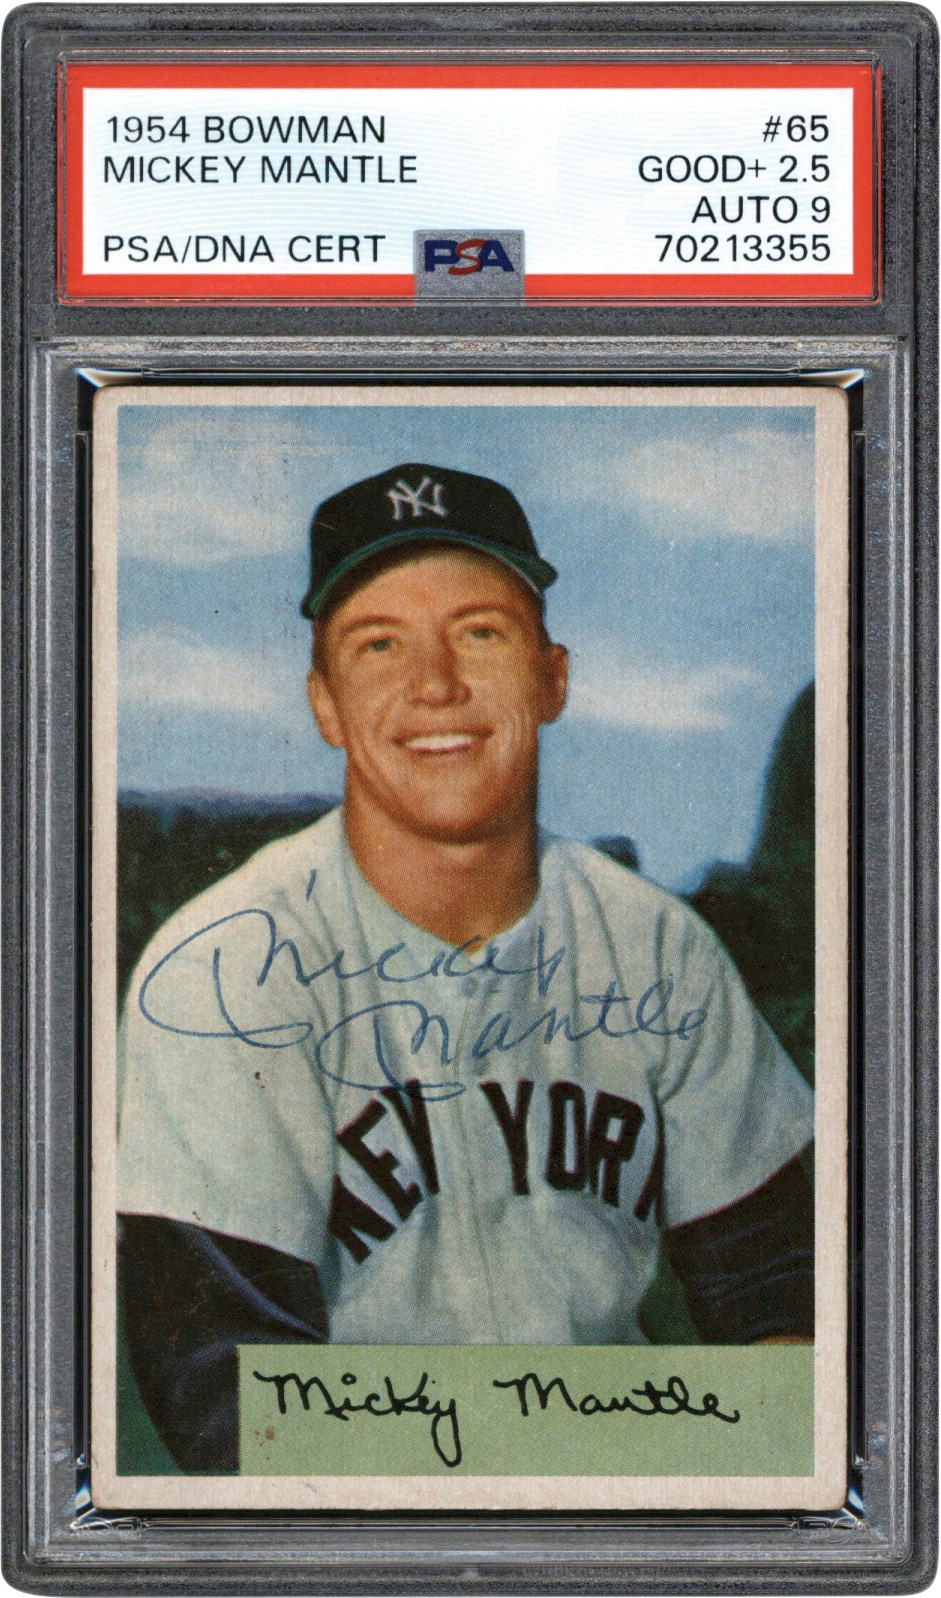 - Signed 1954 Bowman #65 Mickey Mantle PSA GD+ 2.5 Auto 9